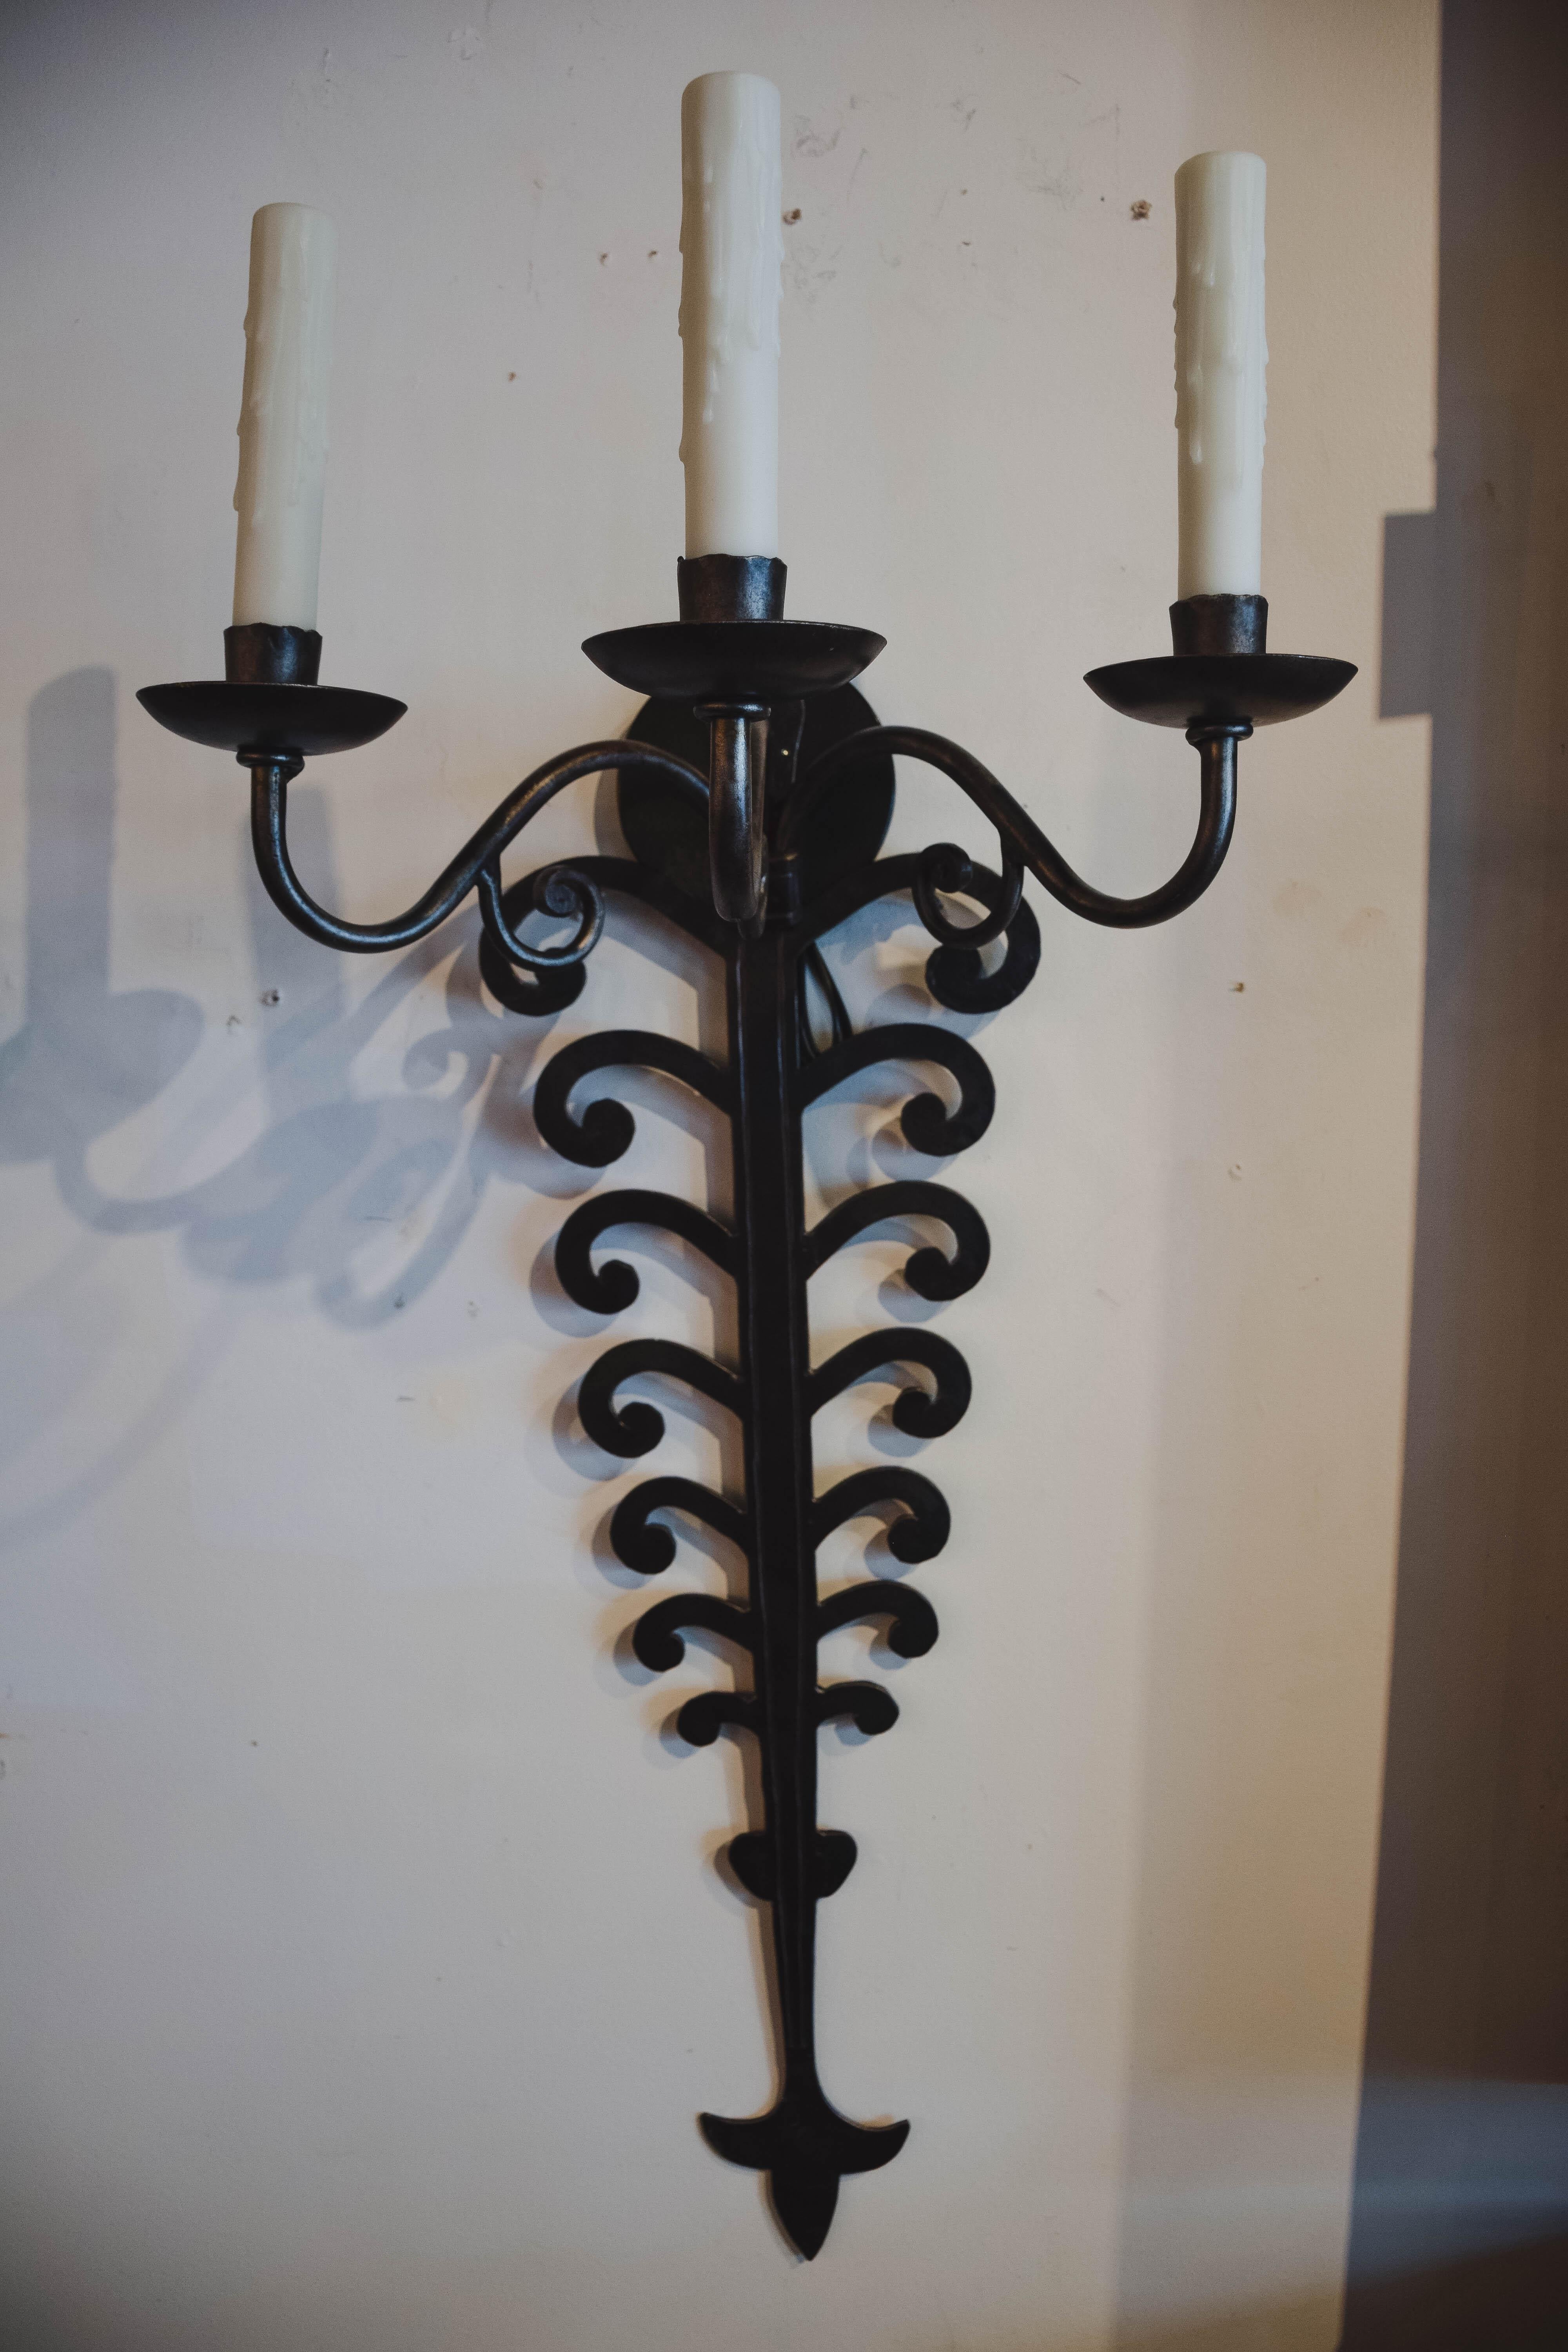 Found in France, these dramatic iron sconces are definite statement pieces. Hand forged in the late 19th century to once hold candles, the sconces have been newly wired to United States standards.